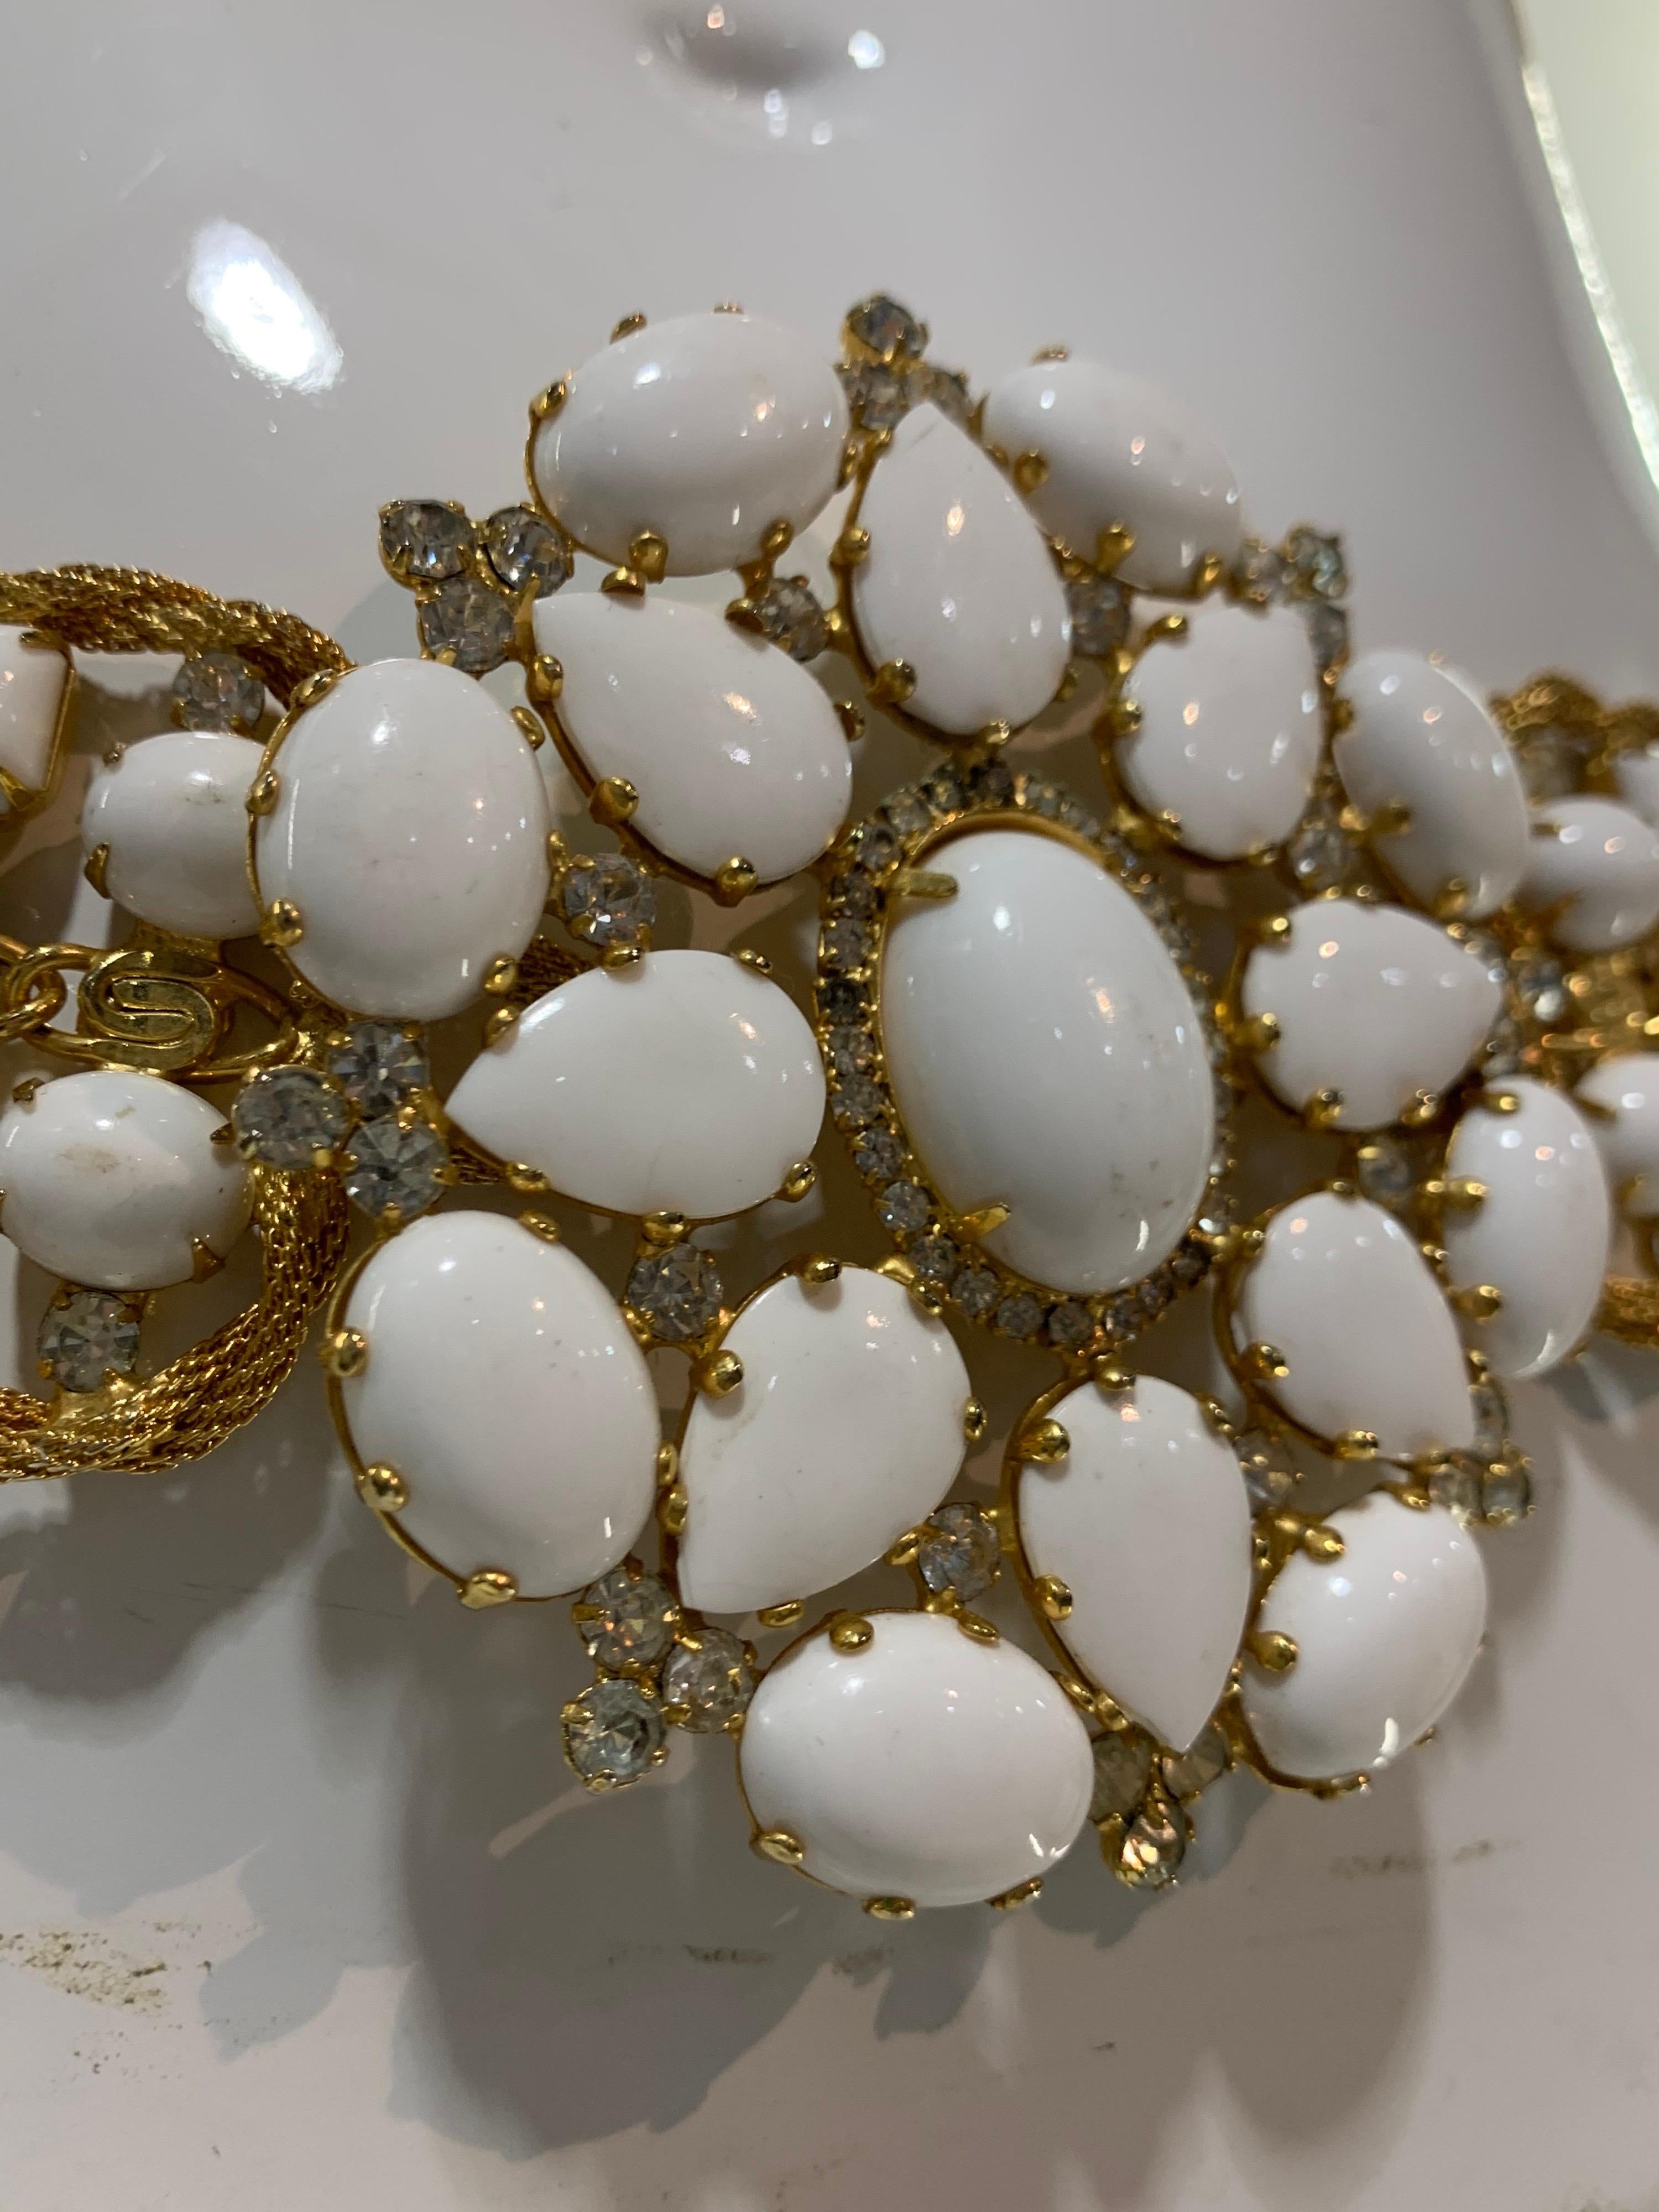 A fabulous, wide 1960s Kenneth Jay Lane jeweled gold-tone belt w/ milk glass & rhinestones set in heavy gold chain link. Adjustible between size 6-8.